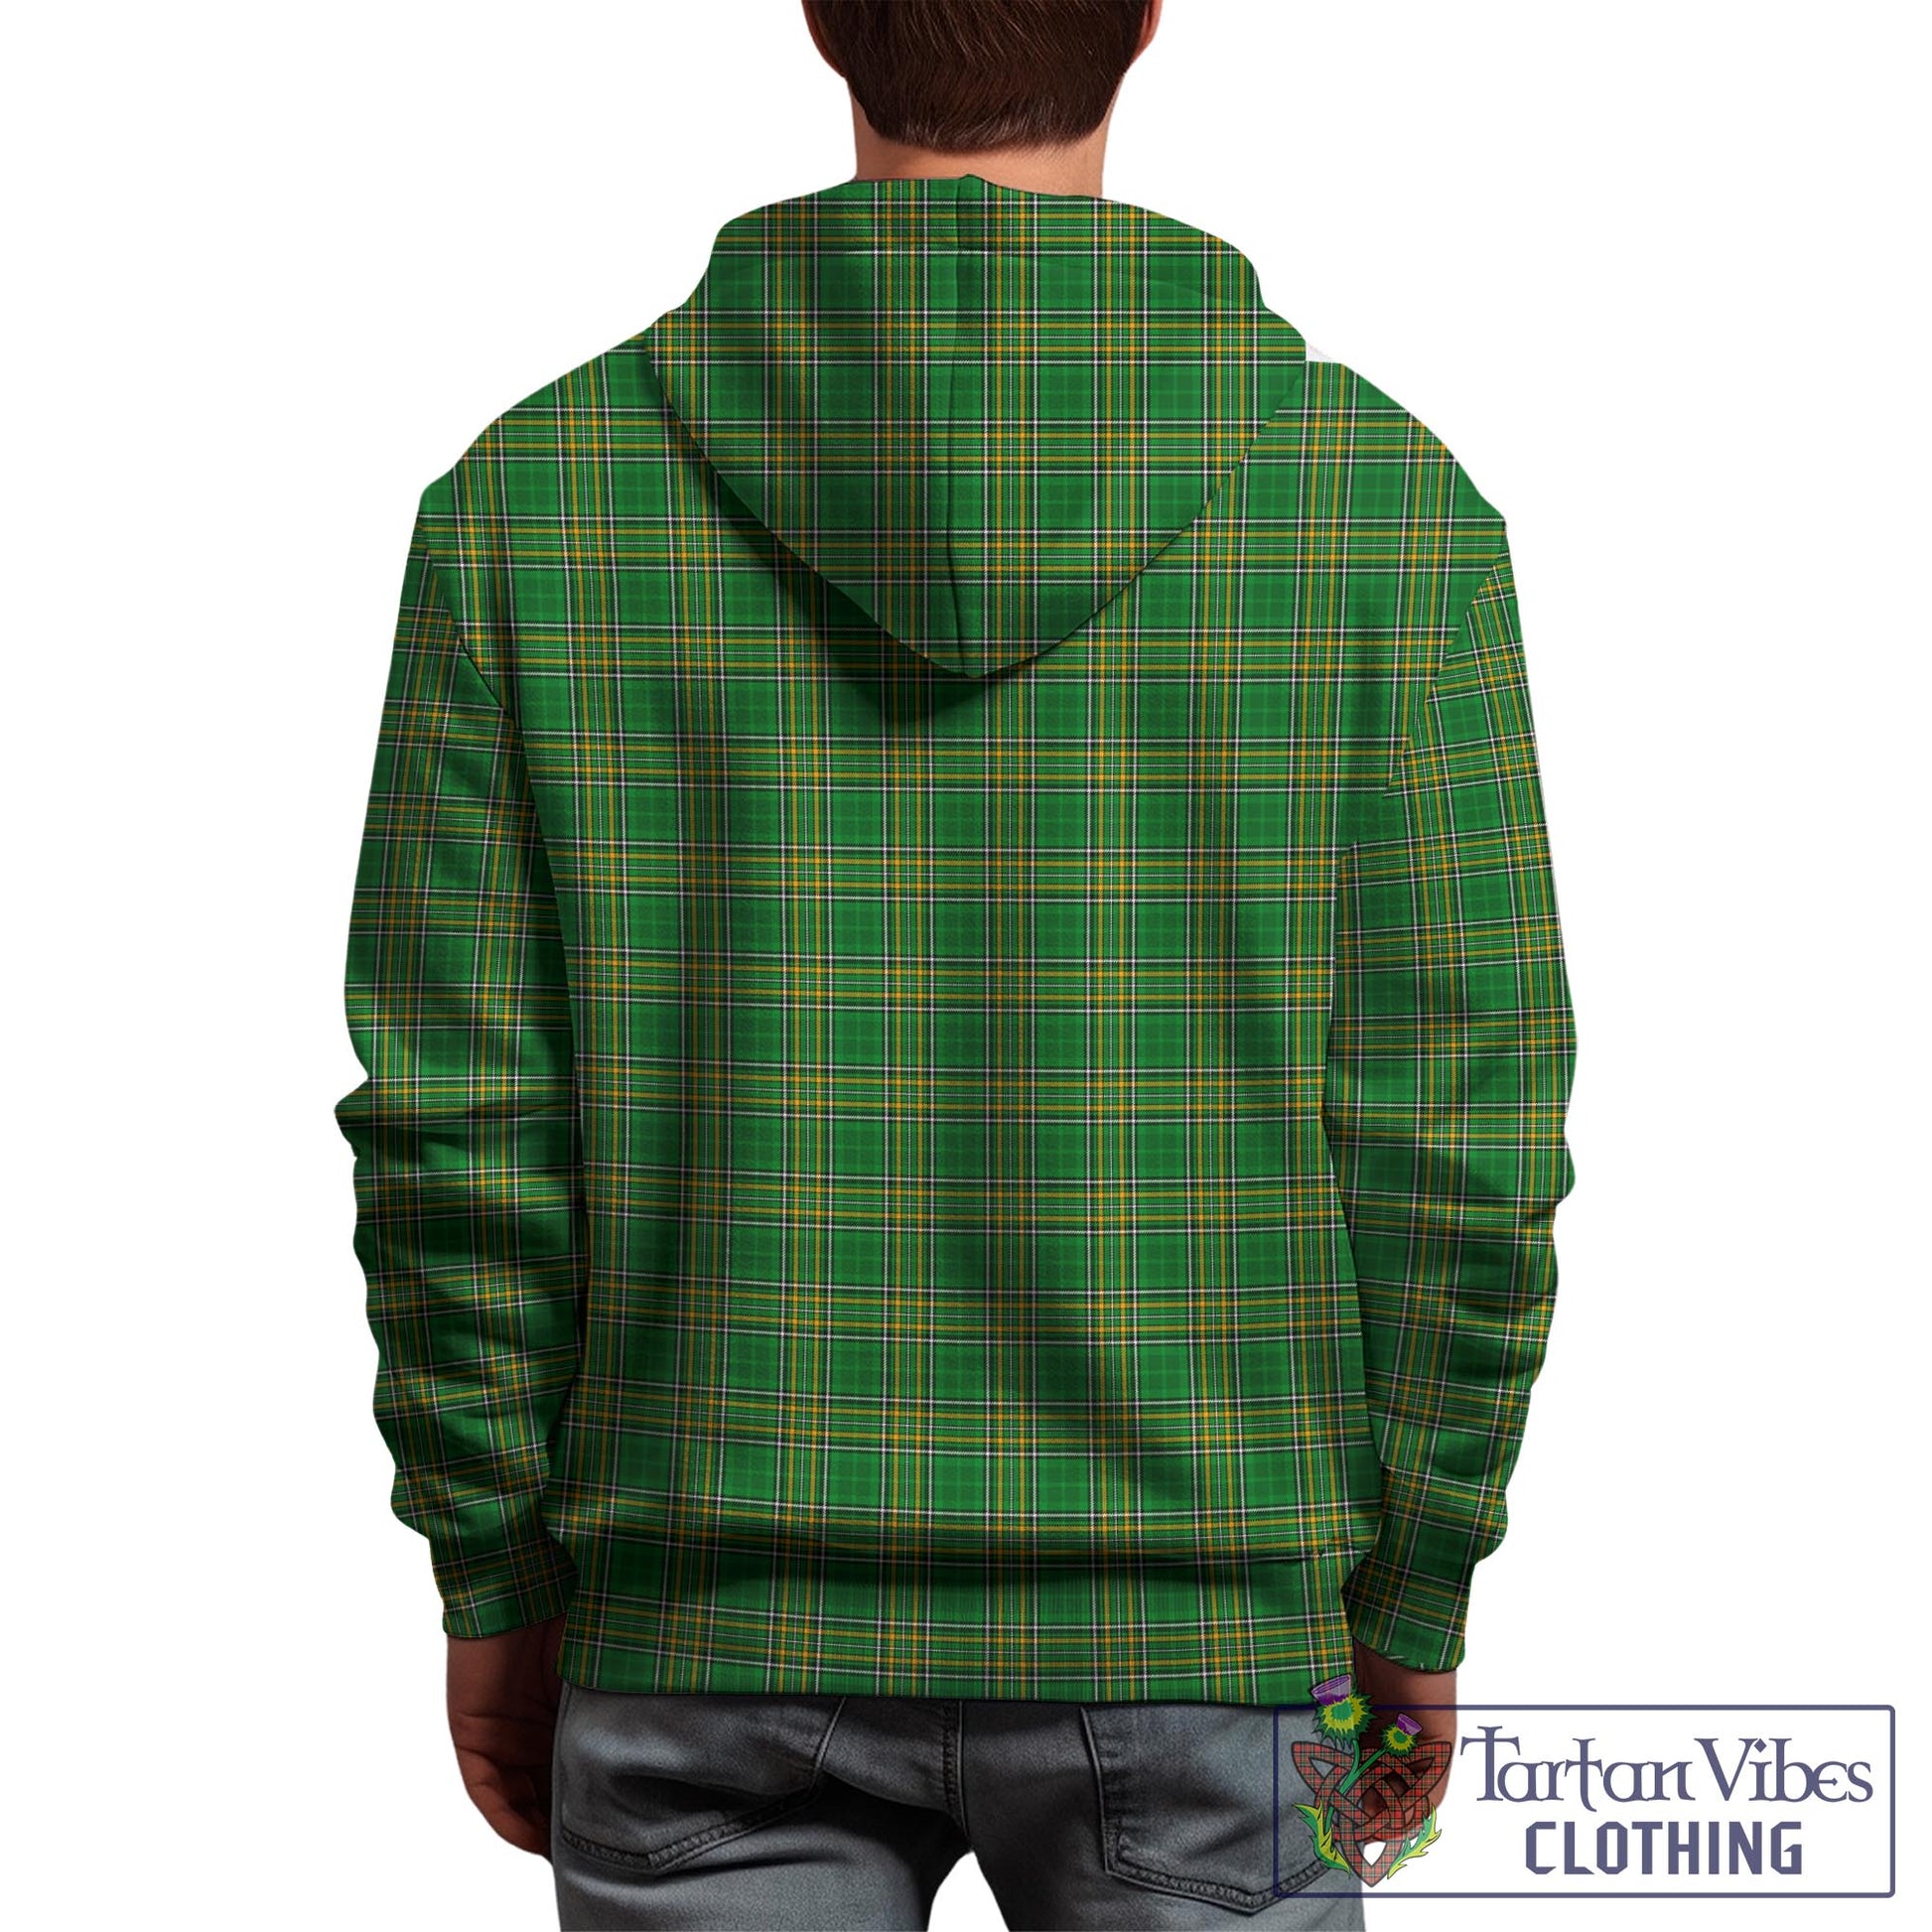 Tartan Vibes Clothing Alley Ireland Clan Tartan Hoodie with Coat of Arms